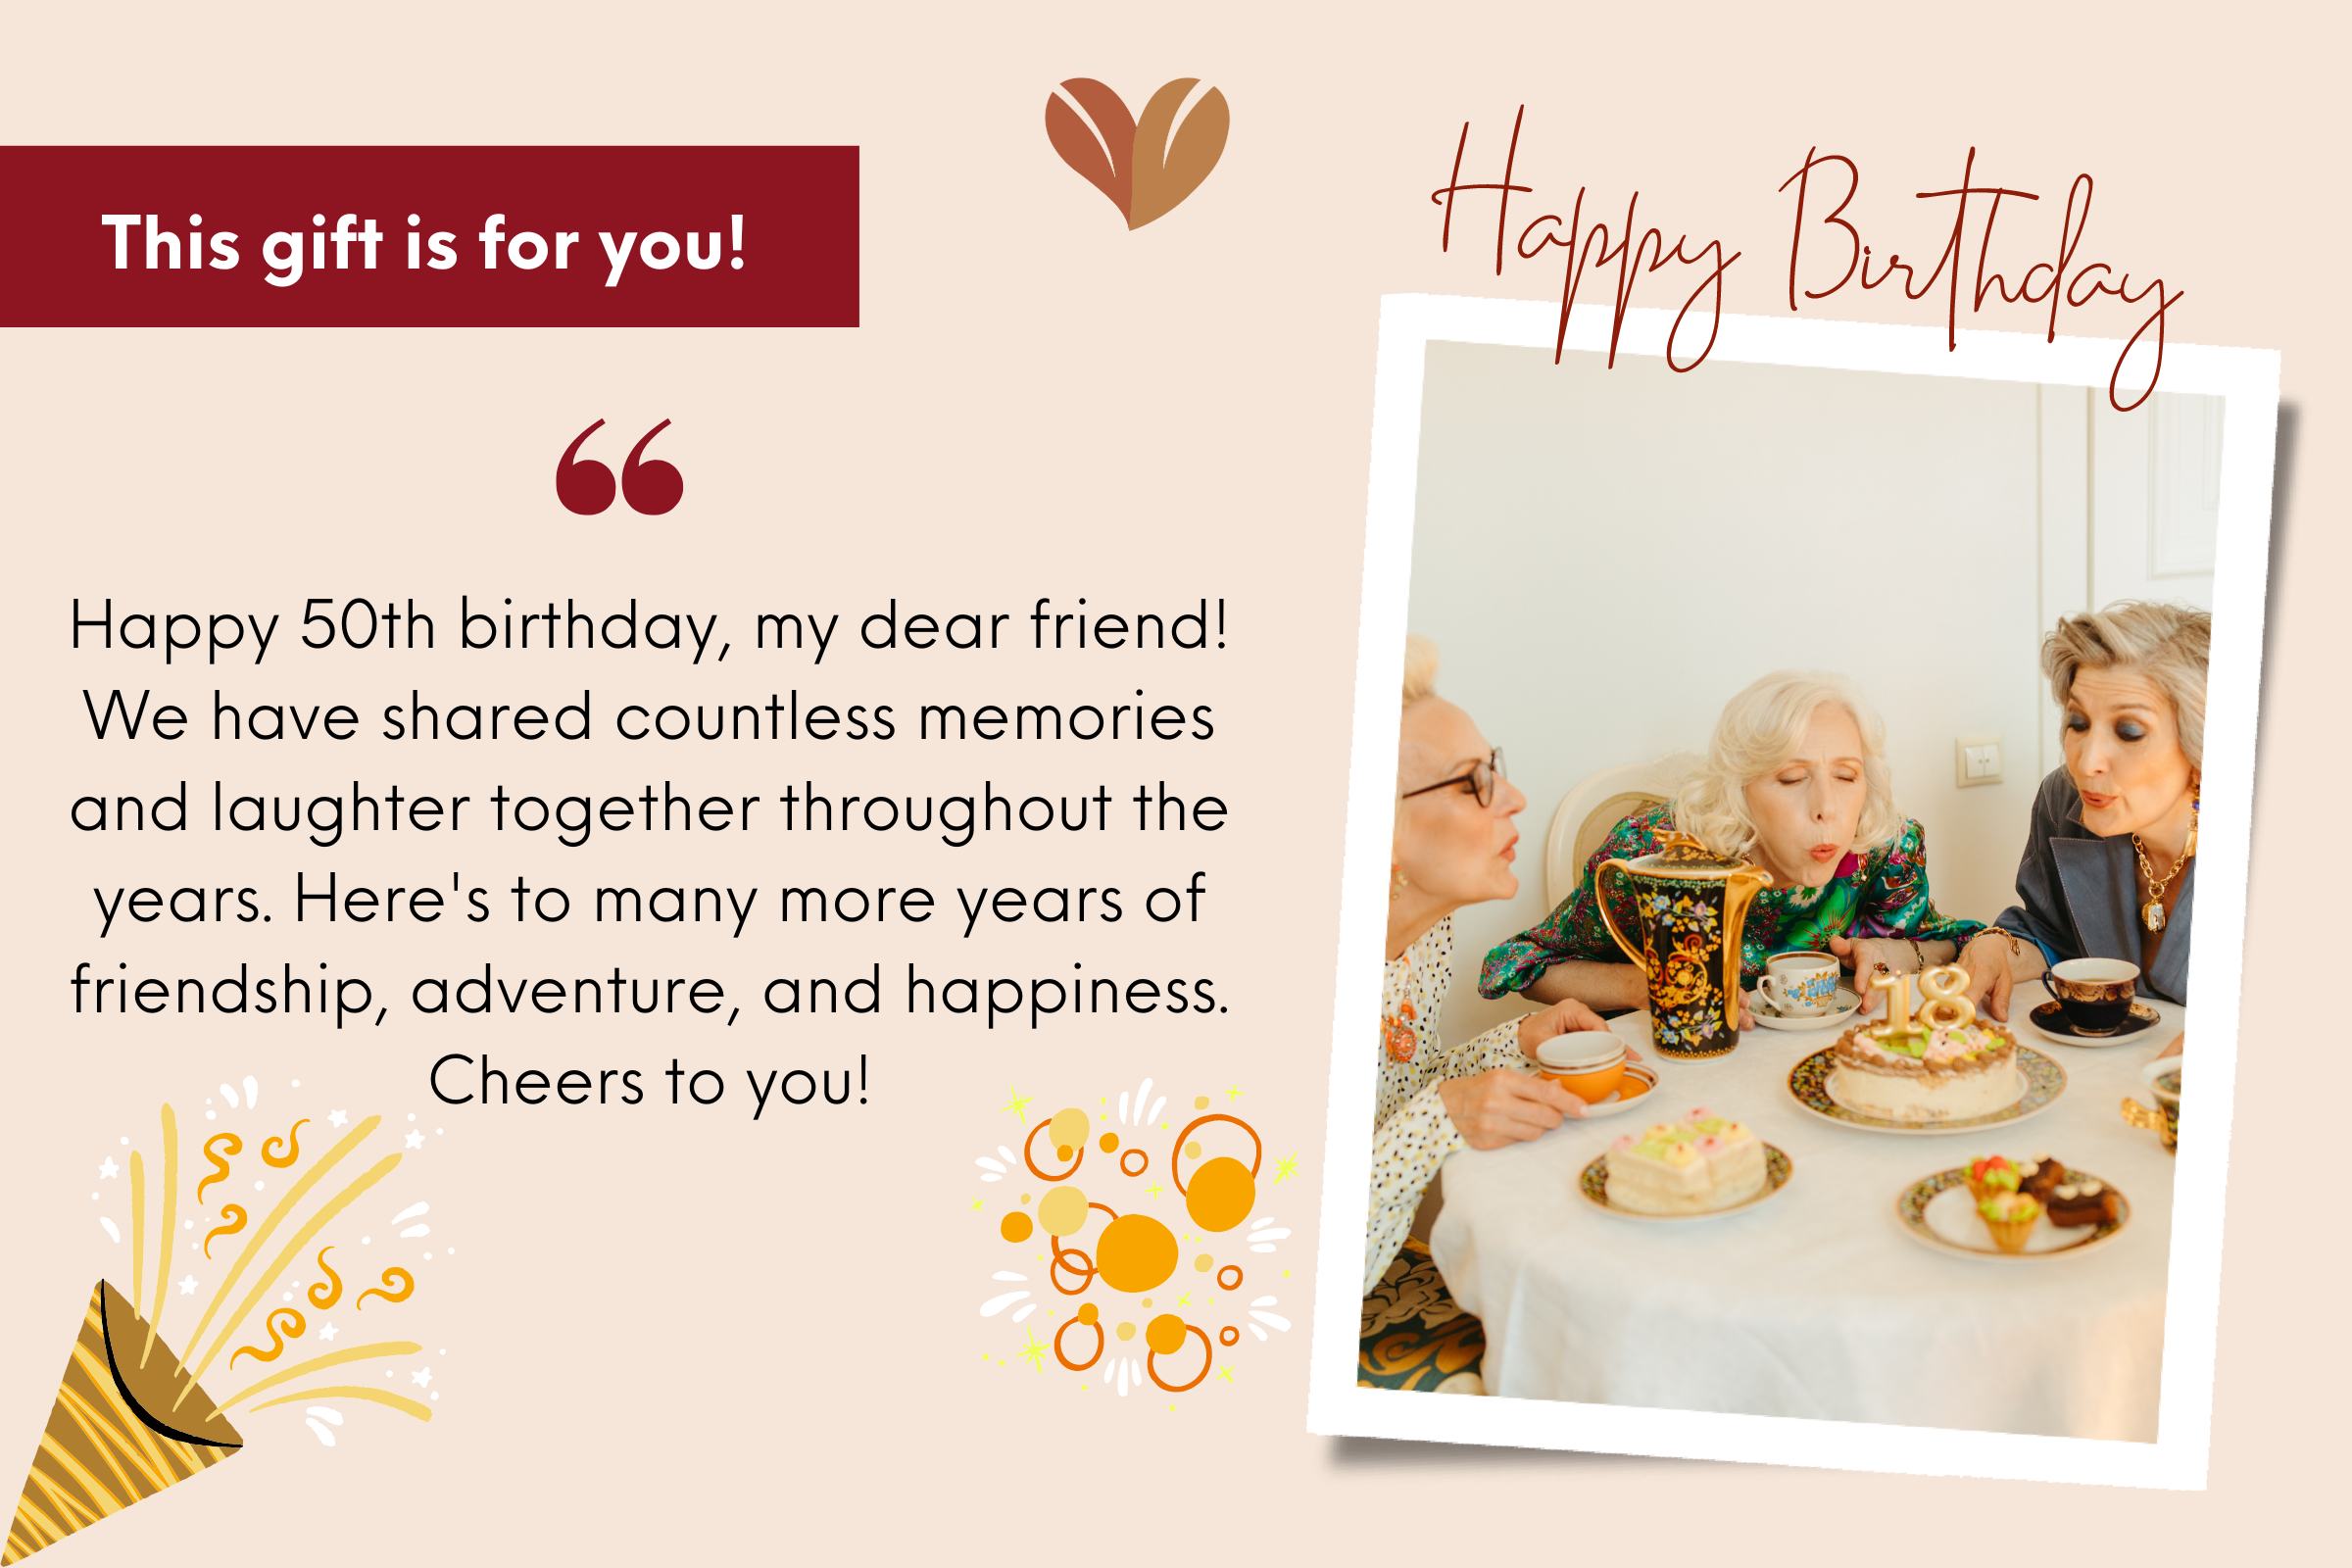 Celebrating five decades of life – sending you the happiest 50th birthday wishes!